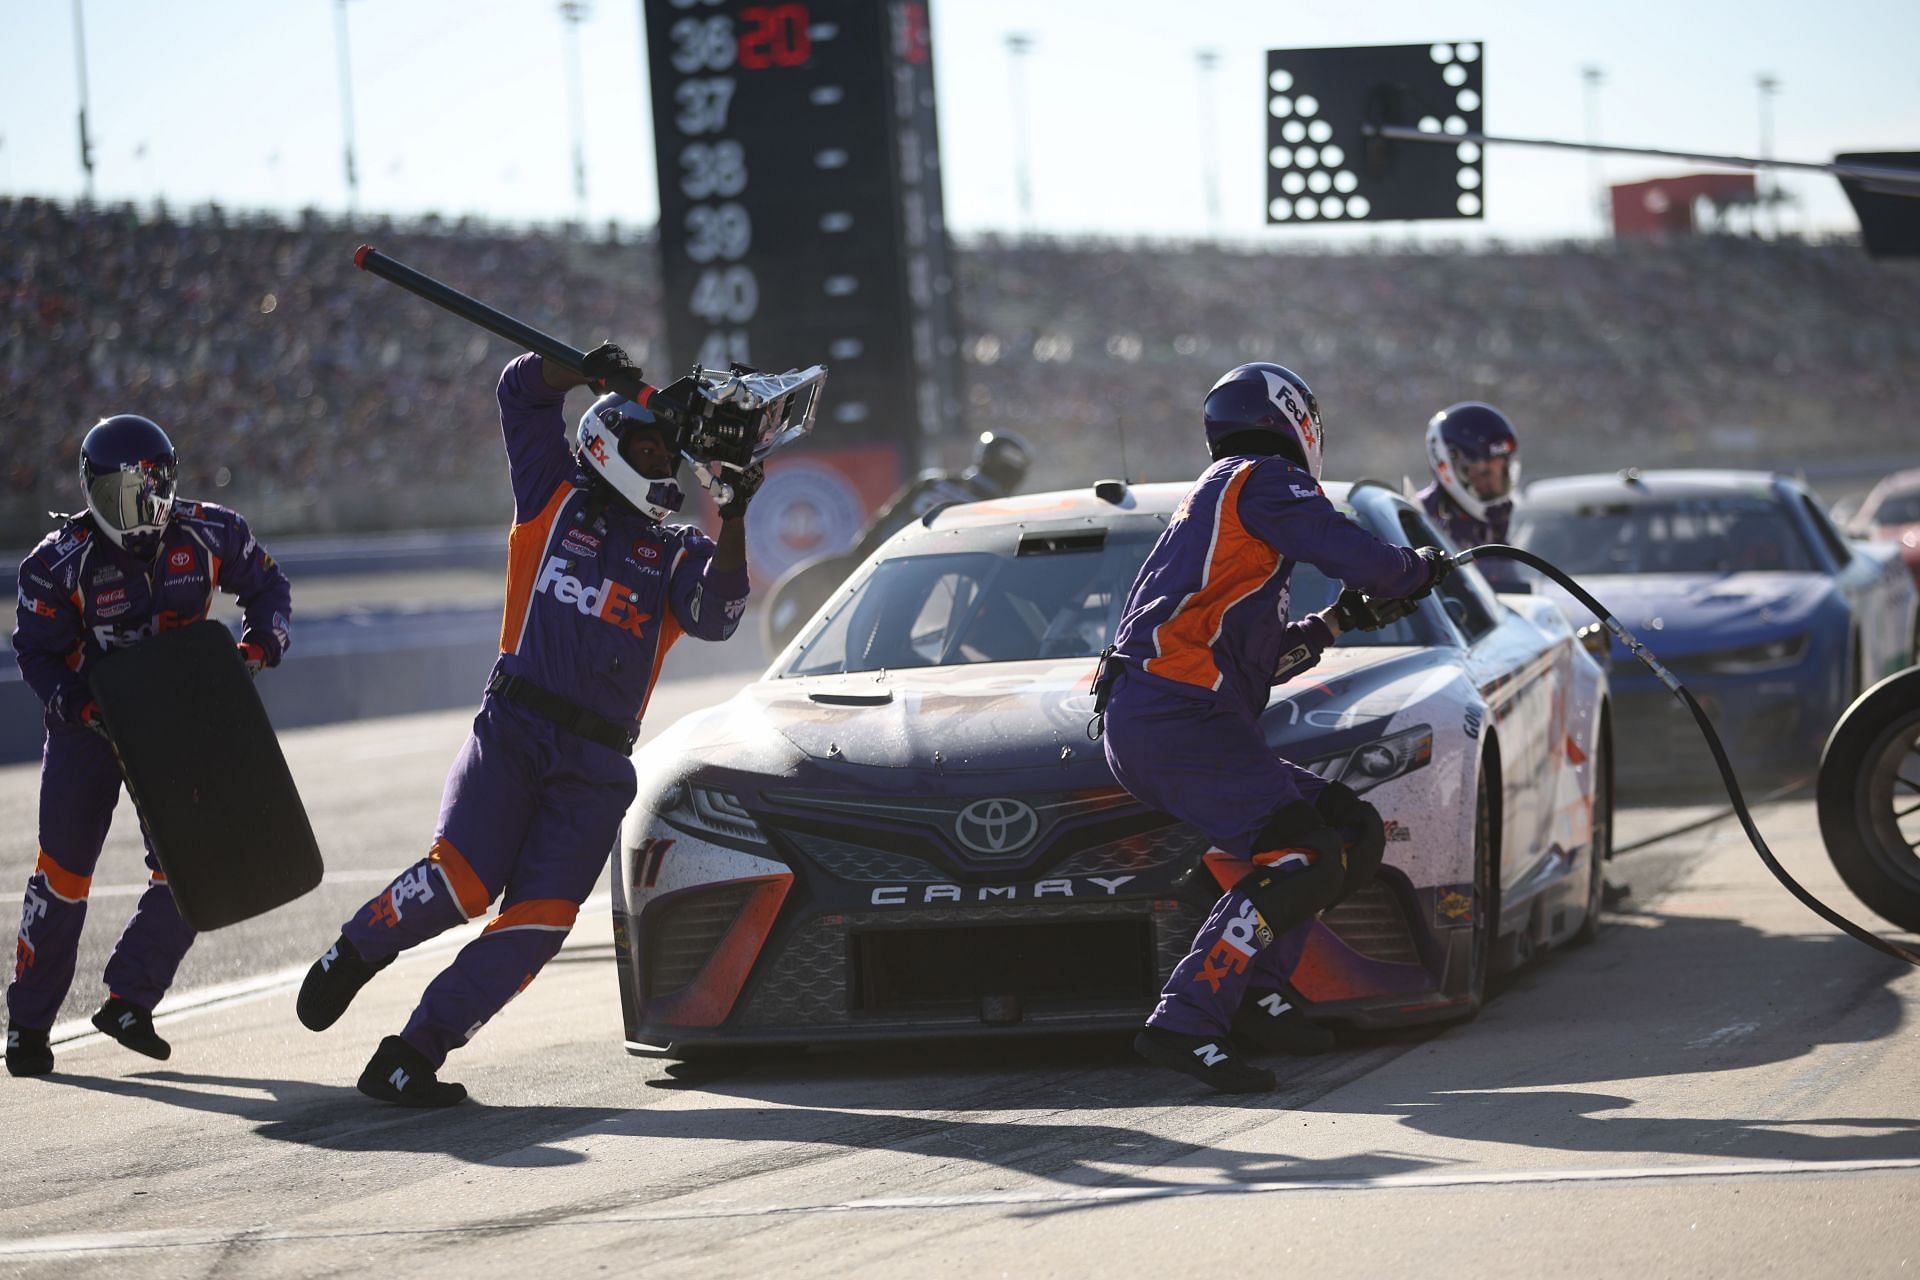 Denny Hamlin pits during the 2022 NASCAR Cup Series Wise Power 400 at Auto Club Speedway in Fontana, California. (Photo by James Gilbert/Getty Images)